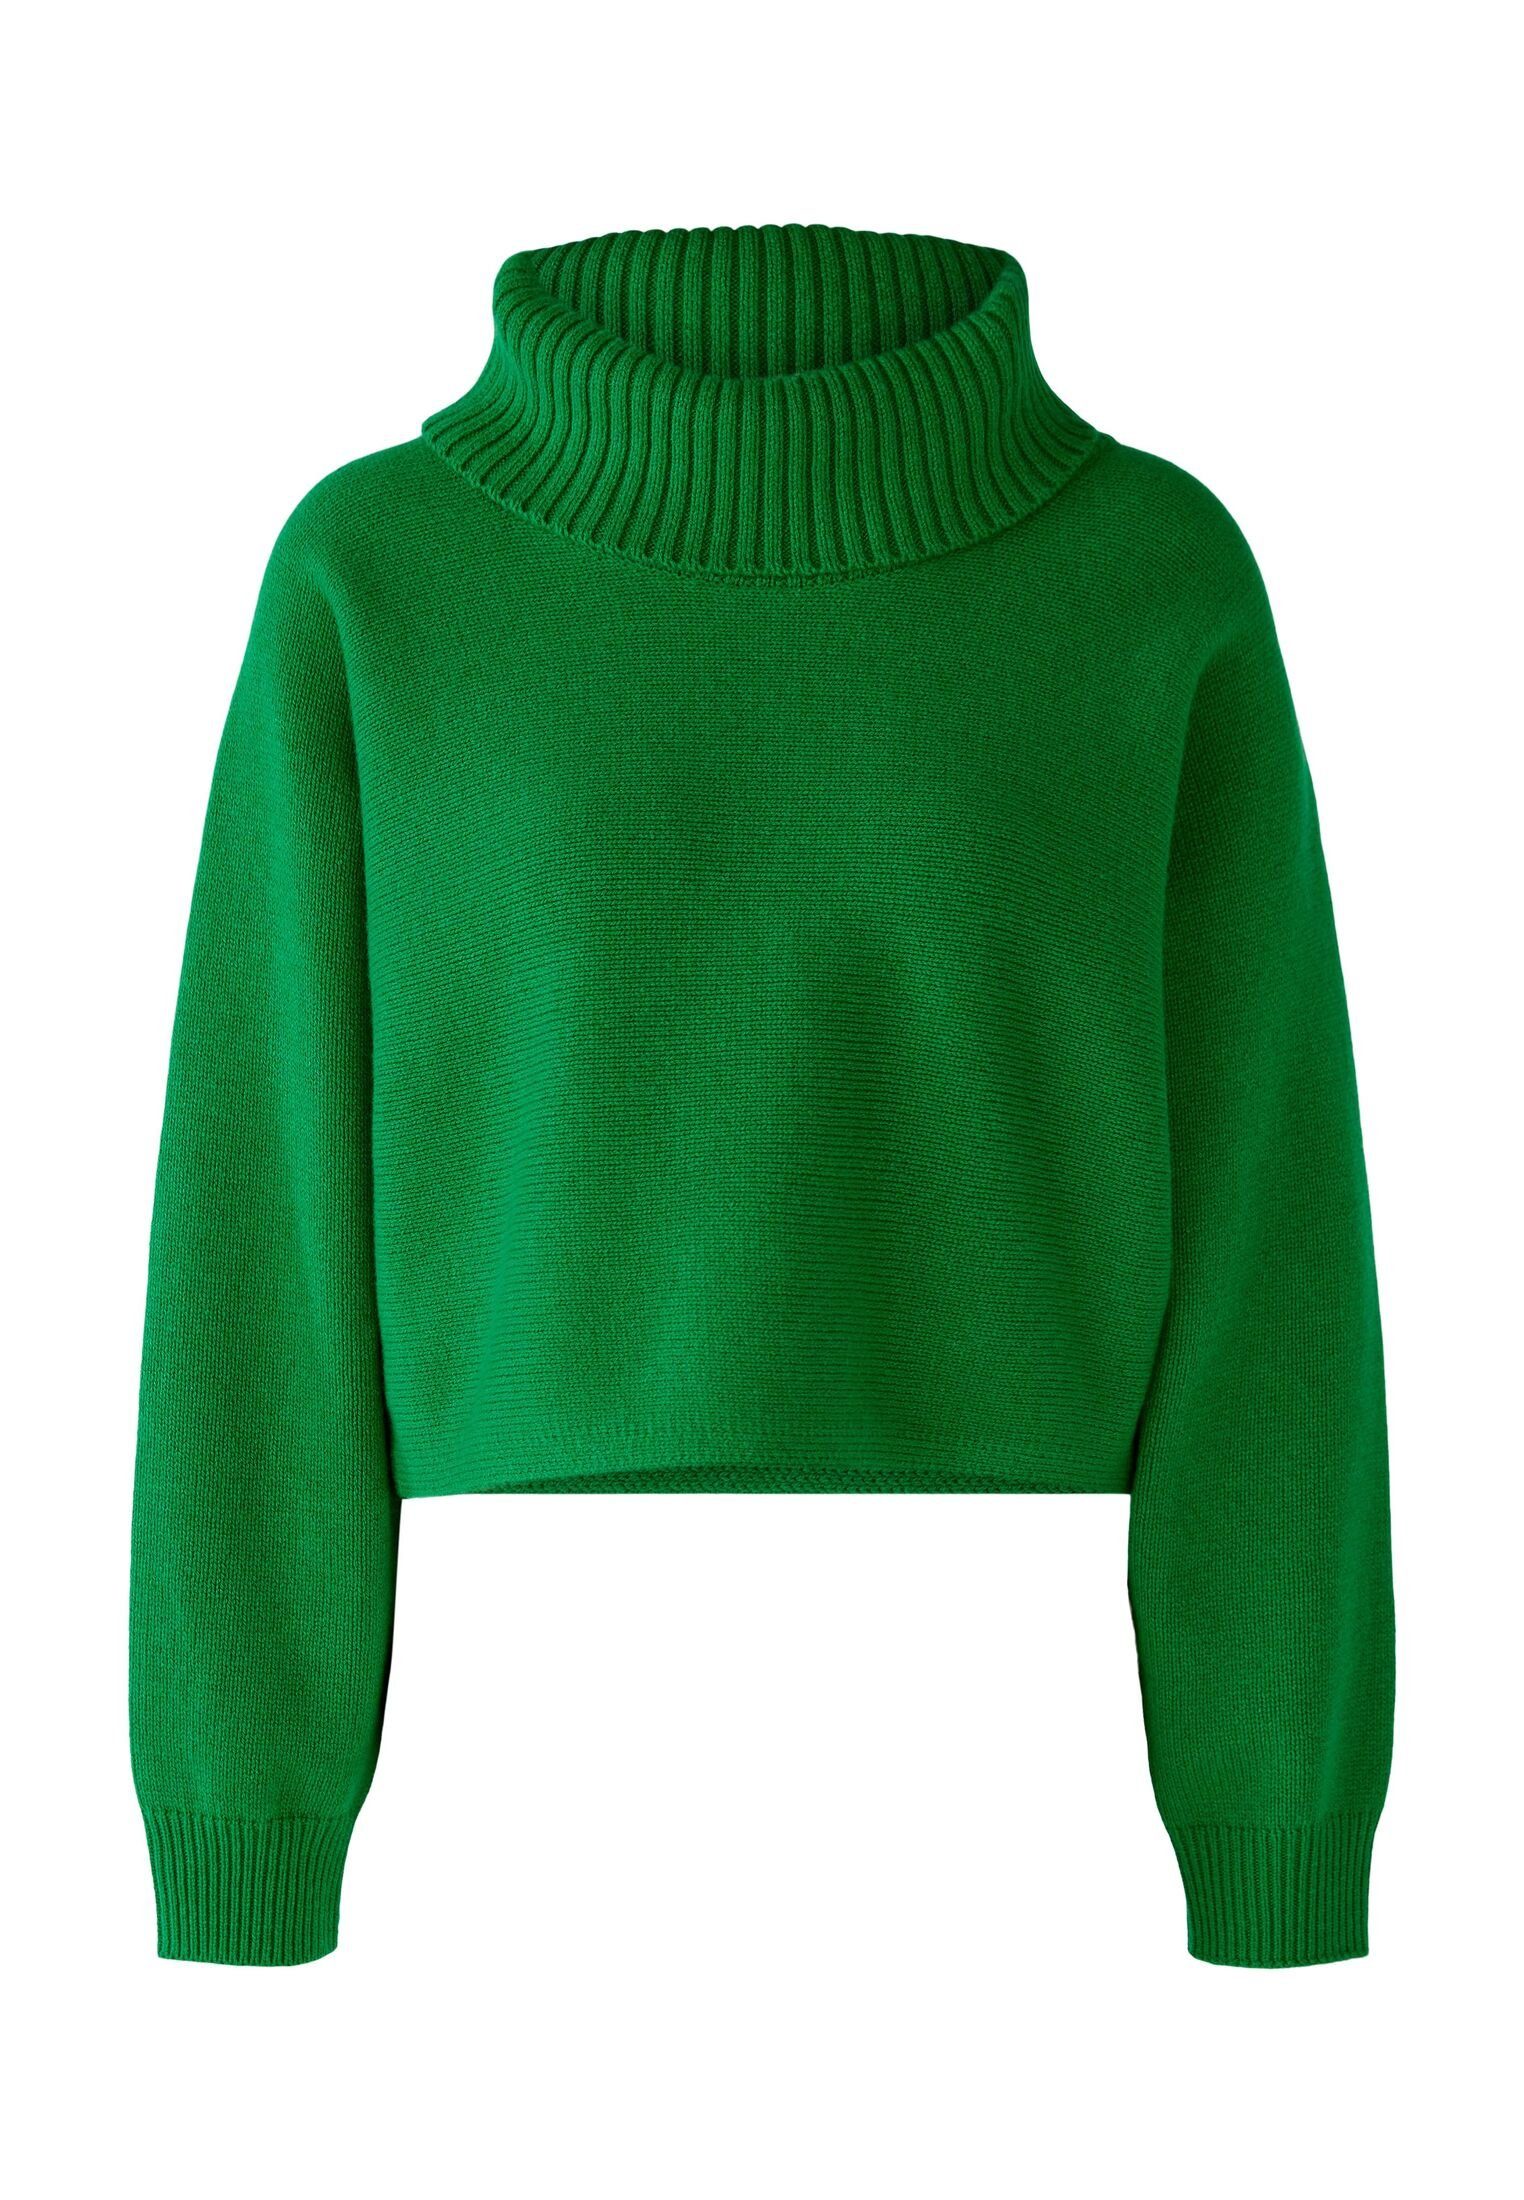 Oui Pullover Strickpullover Wollmischung green